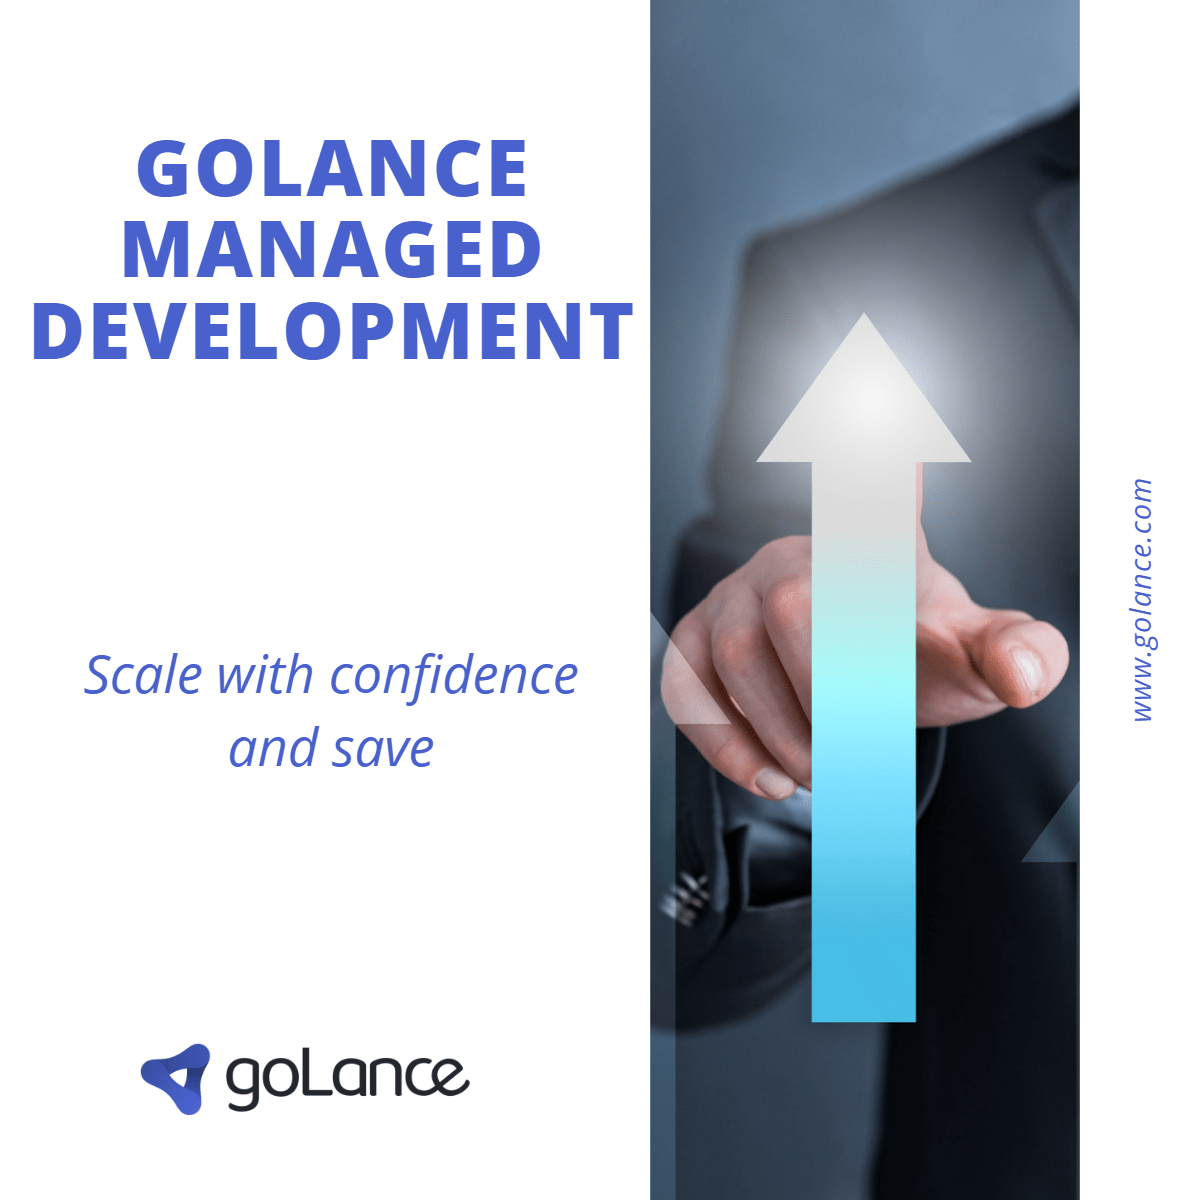 An image with the words: "goLance Managed Development" is written, along with, "Scale with confidence and save"